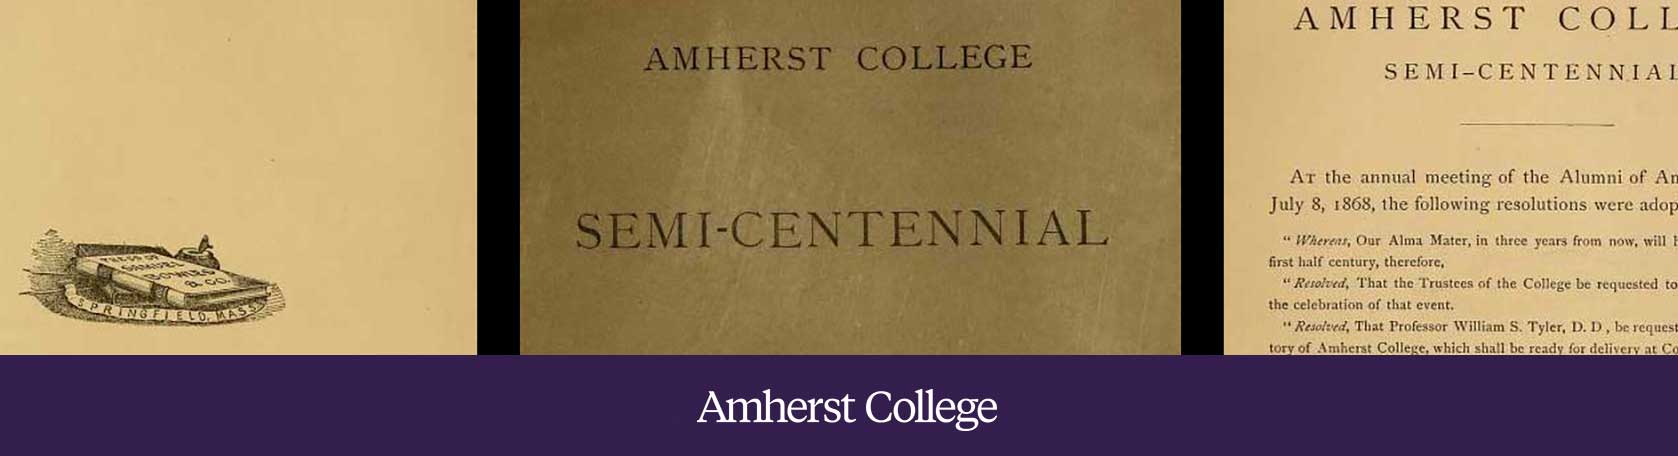 Pages from Amherst College's 1871 Semi-Centennial printed program